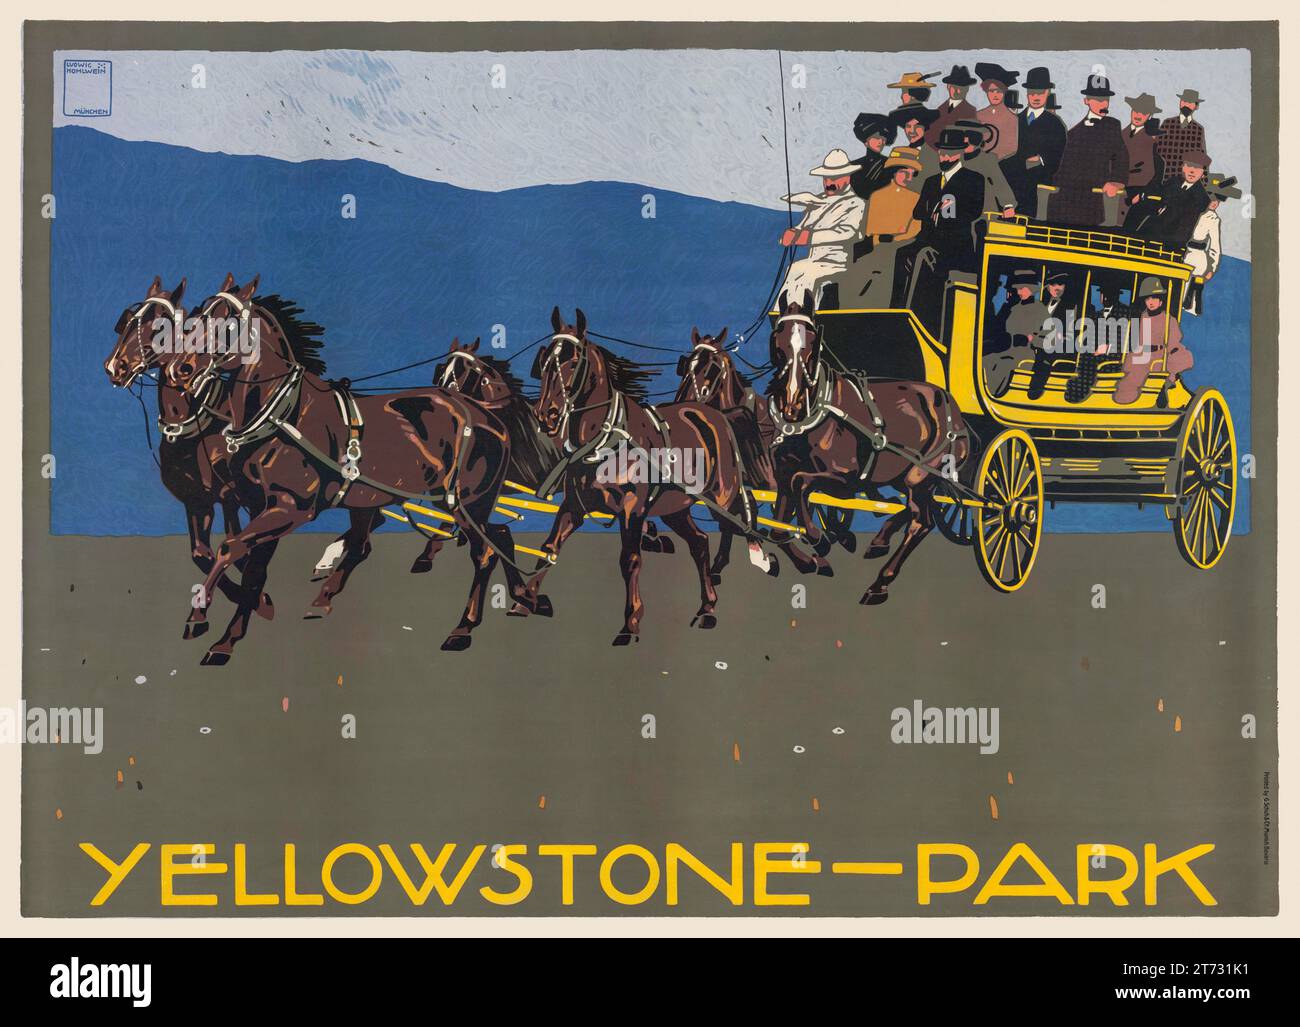 Yellowstone-Park by Ludwig Hohlwein (1874-1949). Poster published in 1910 in Germany. Stock Photo